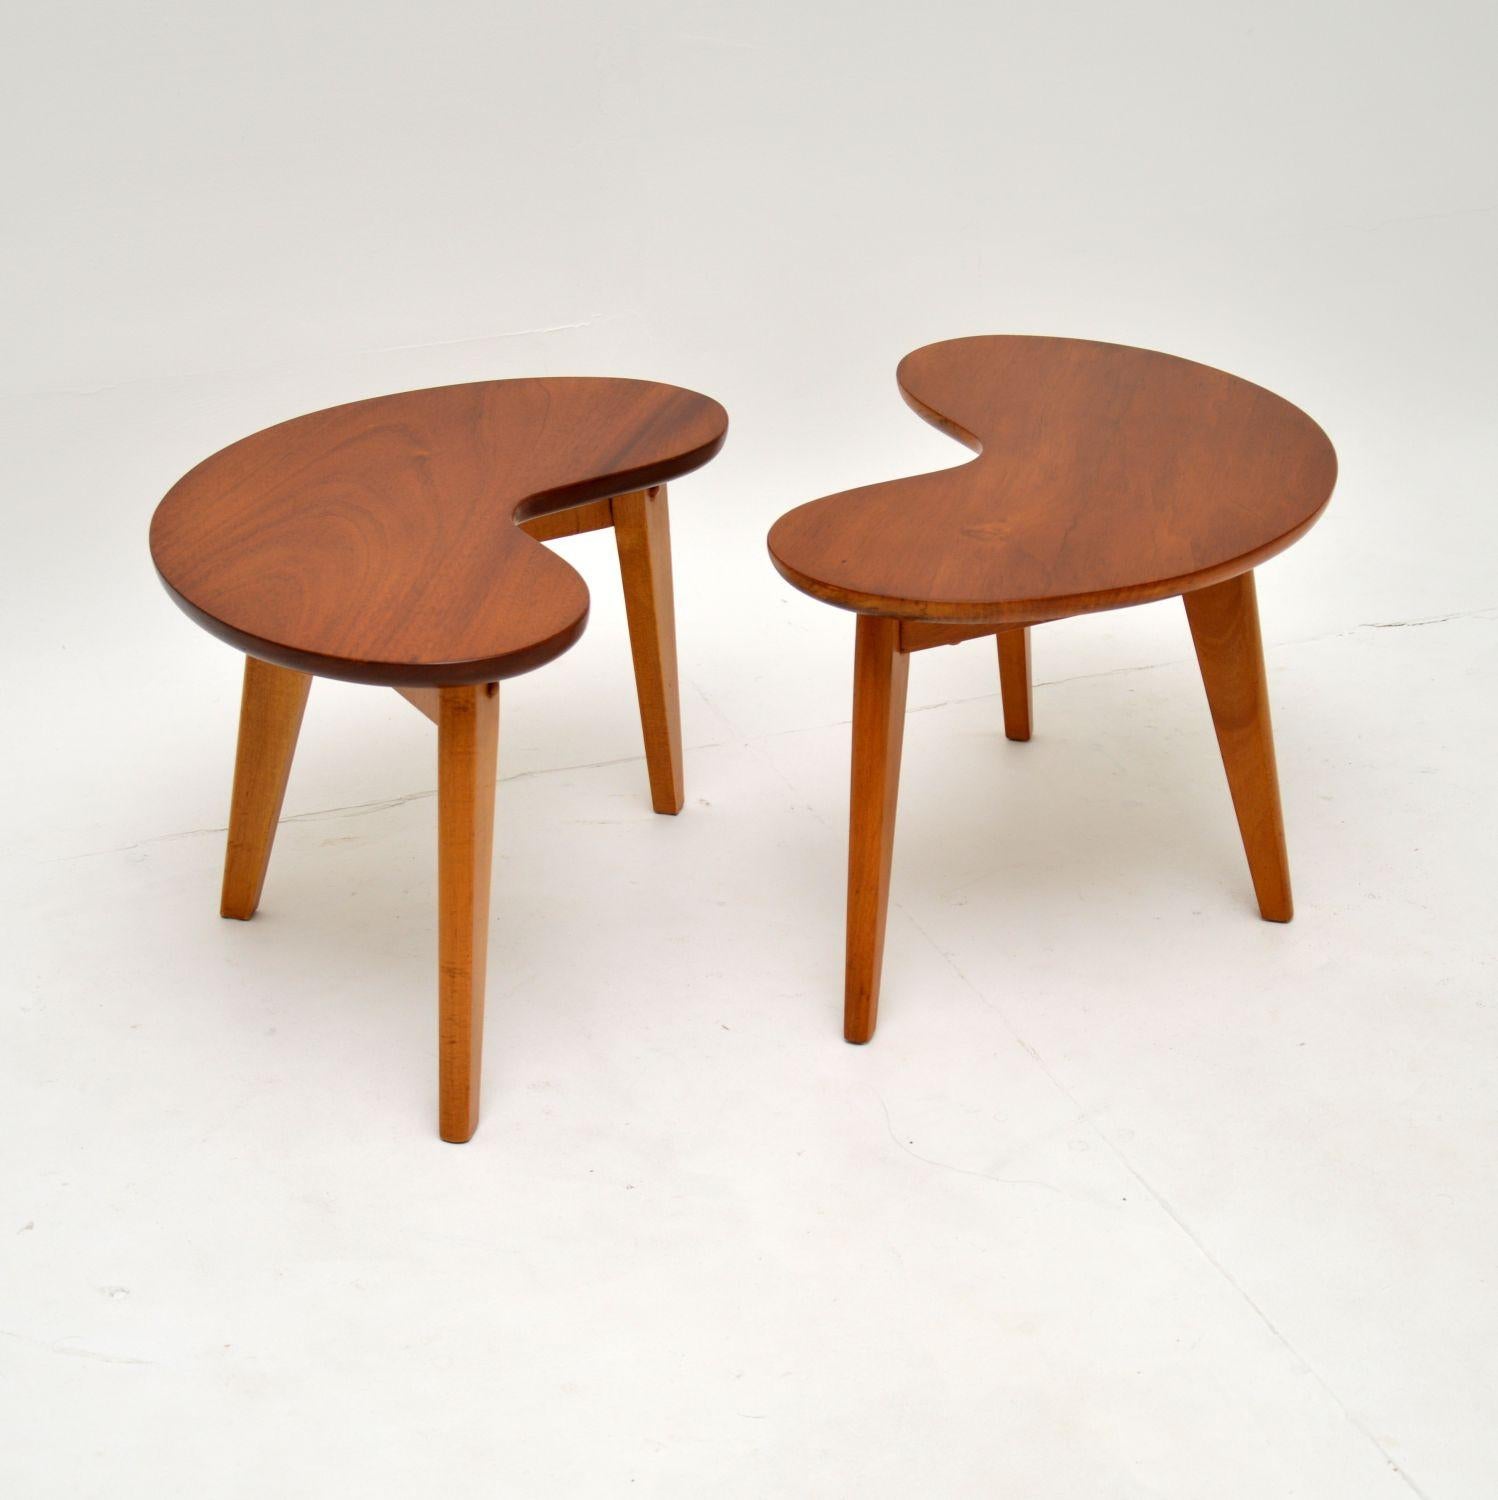 A stunning pair of vintage walnut kidney shaped side tables. These were made in England, they date from the 1950-1960’s.

The quality is fantastic, they are sturdy and are a very useful size. The shape is perfect for use as end tables either side